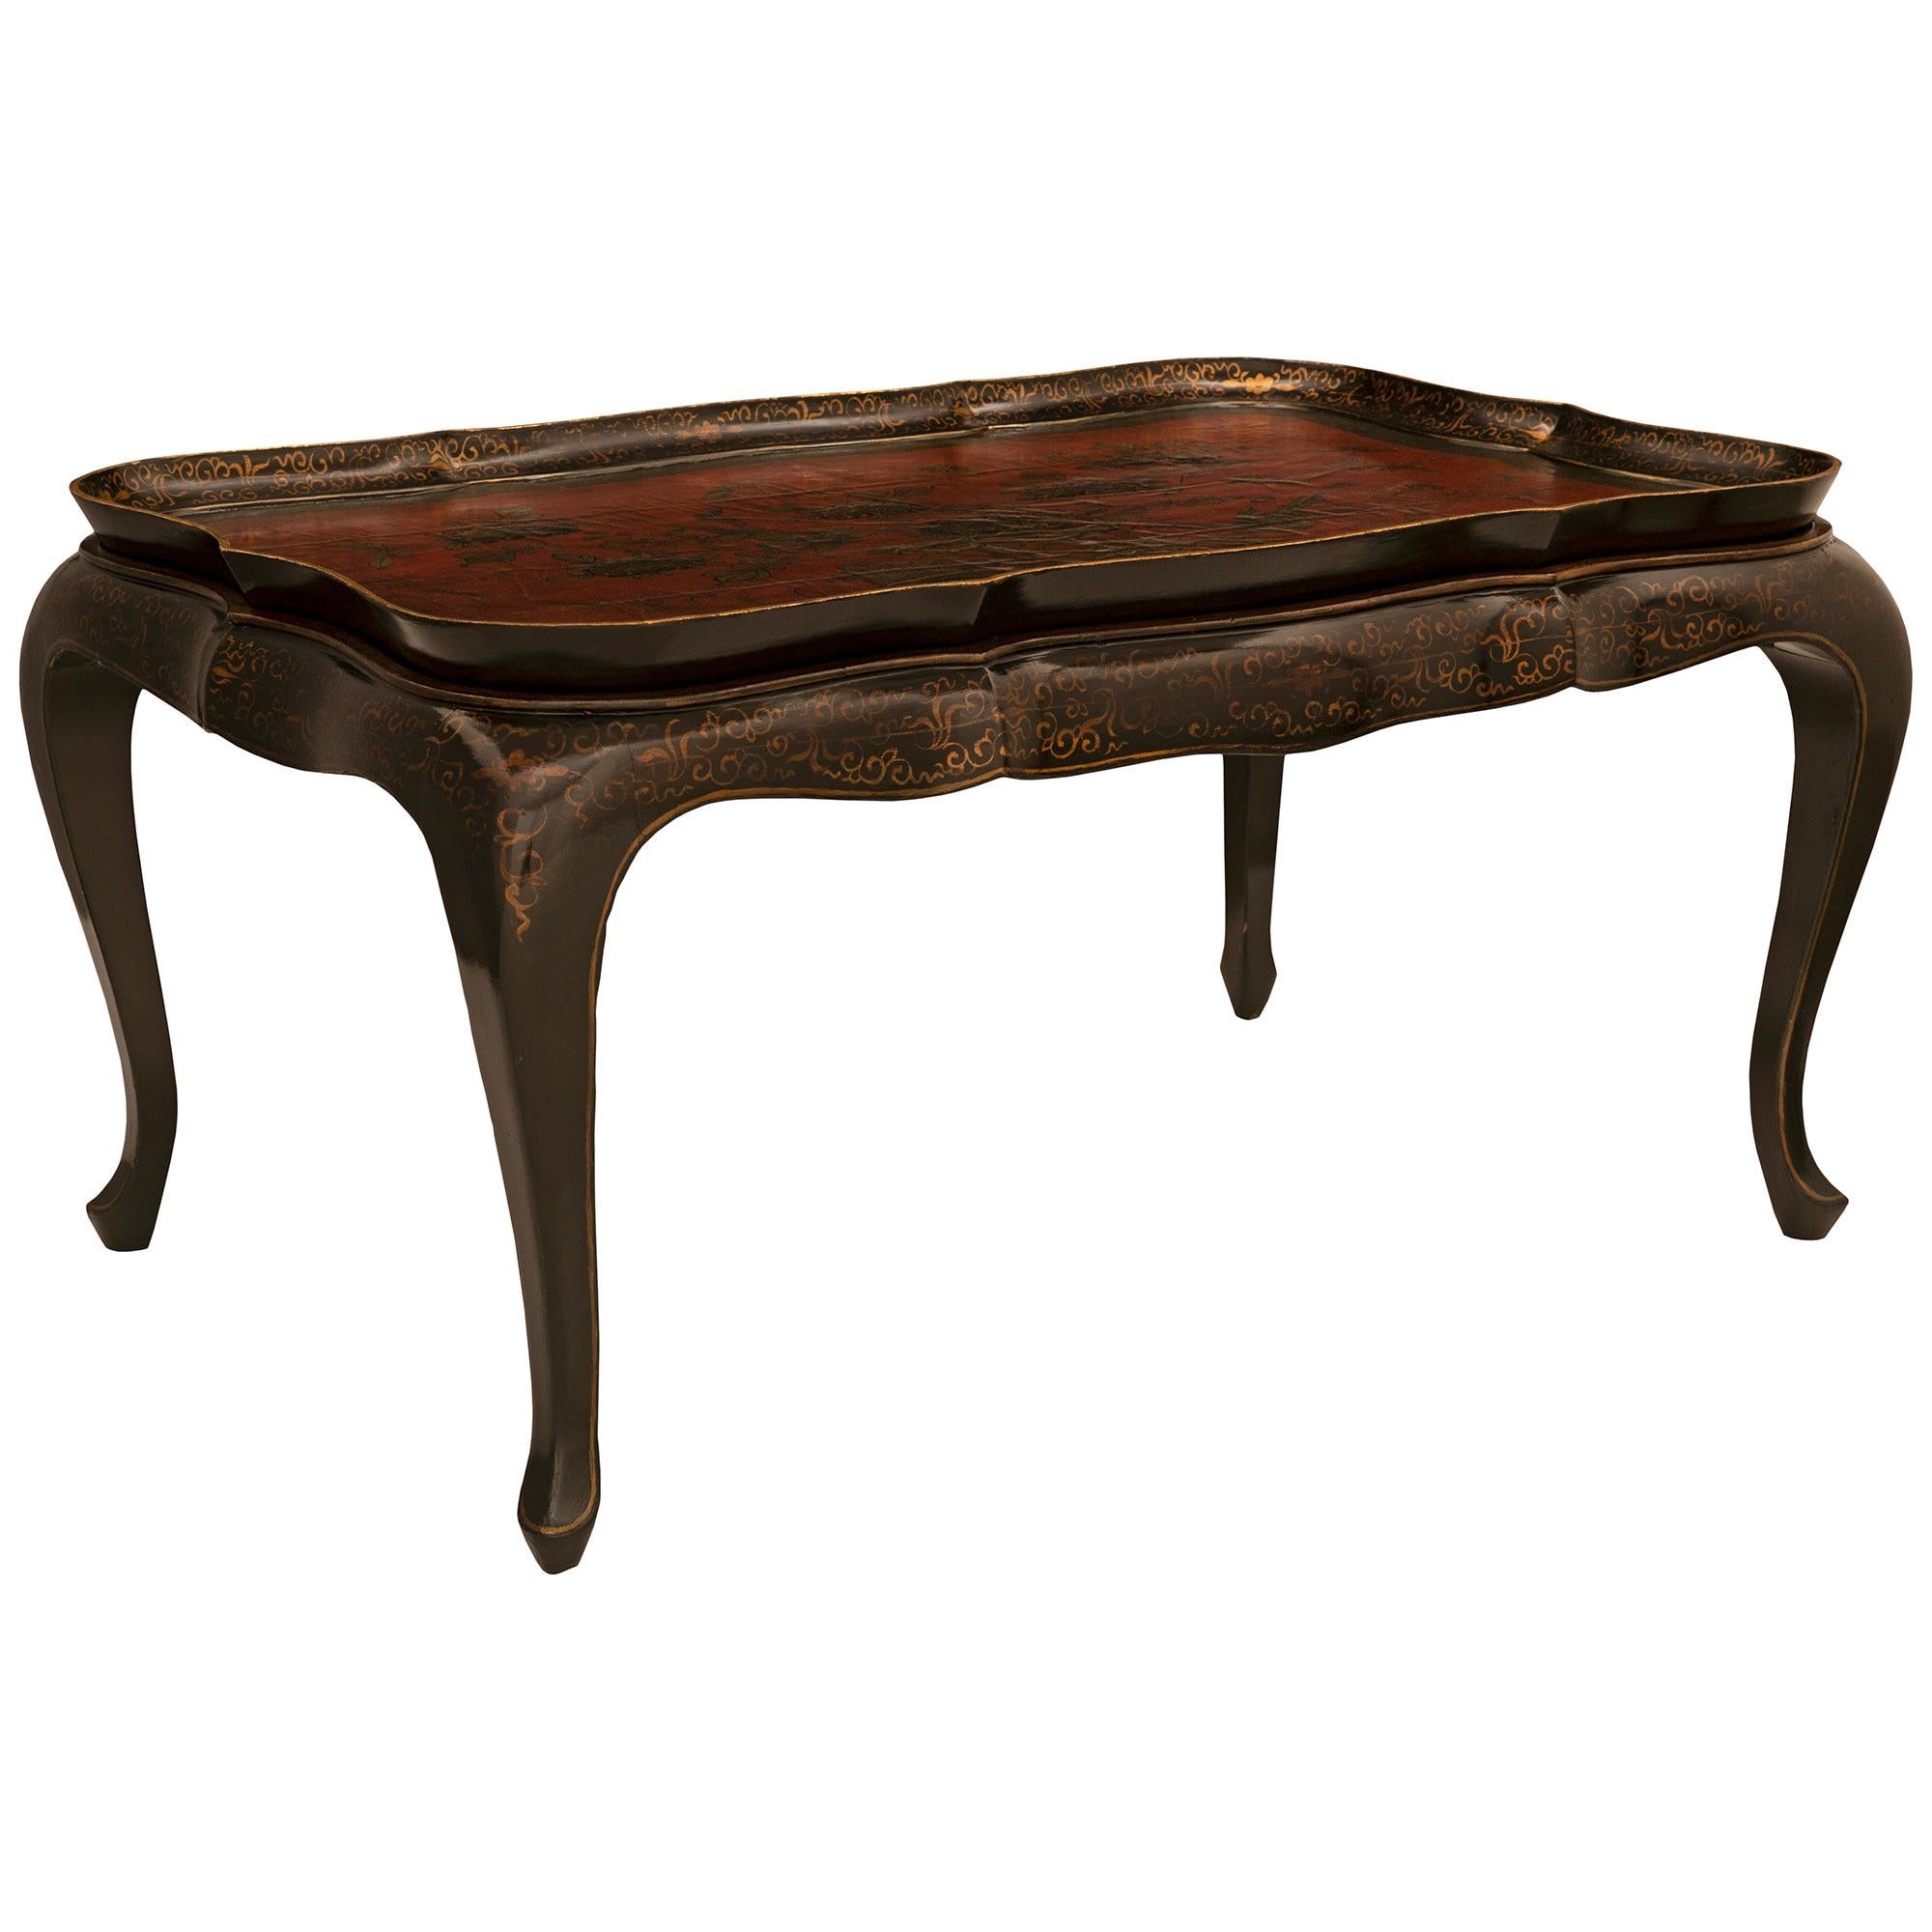 Lacquered English 19th Century Regency St. Chinoiserie Lacquer Coffee Table For Sale